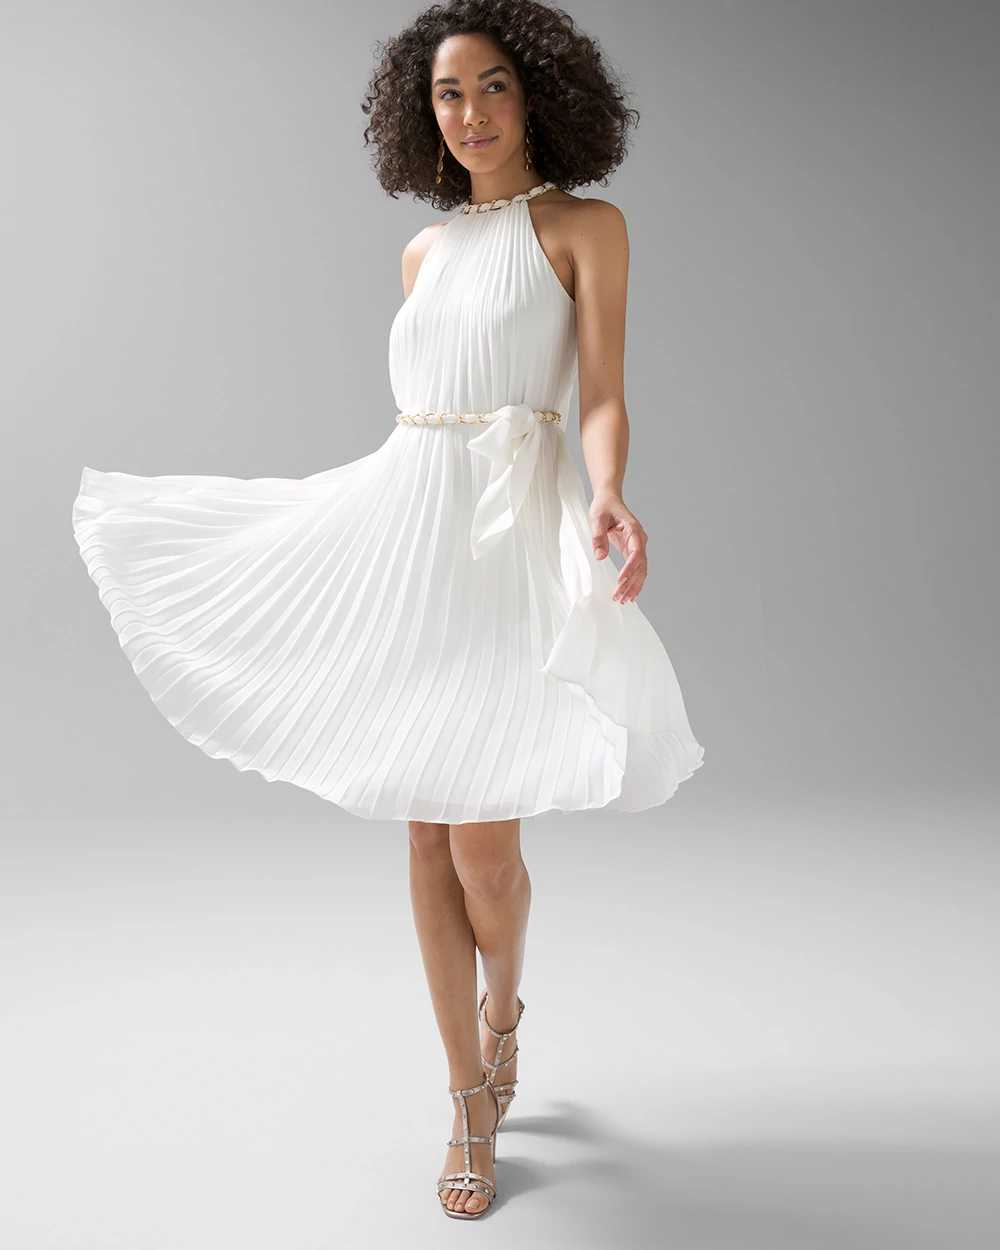 Sleeveless Pleated Halter Dress with Chain Detail